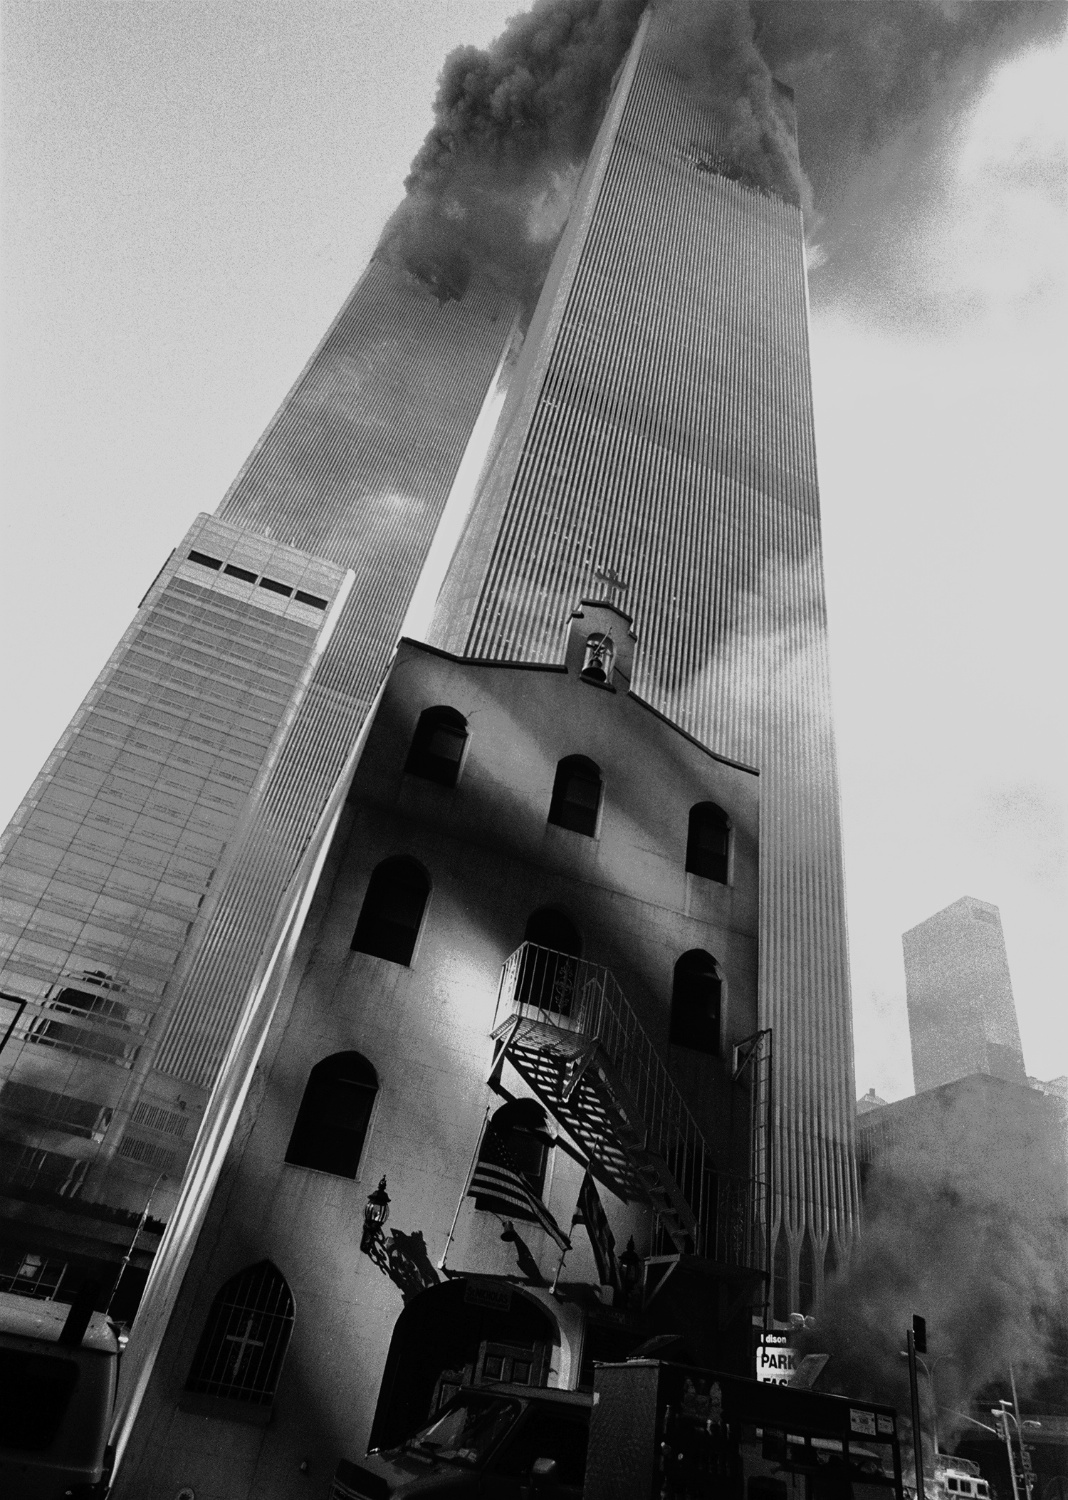 Greek Orthodox Church and Towers, September 11, 2001